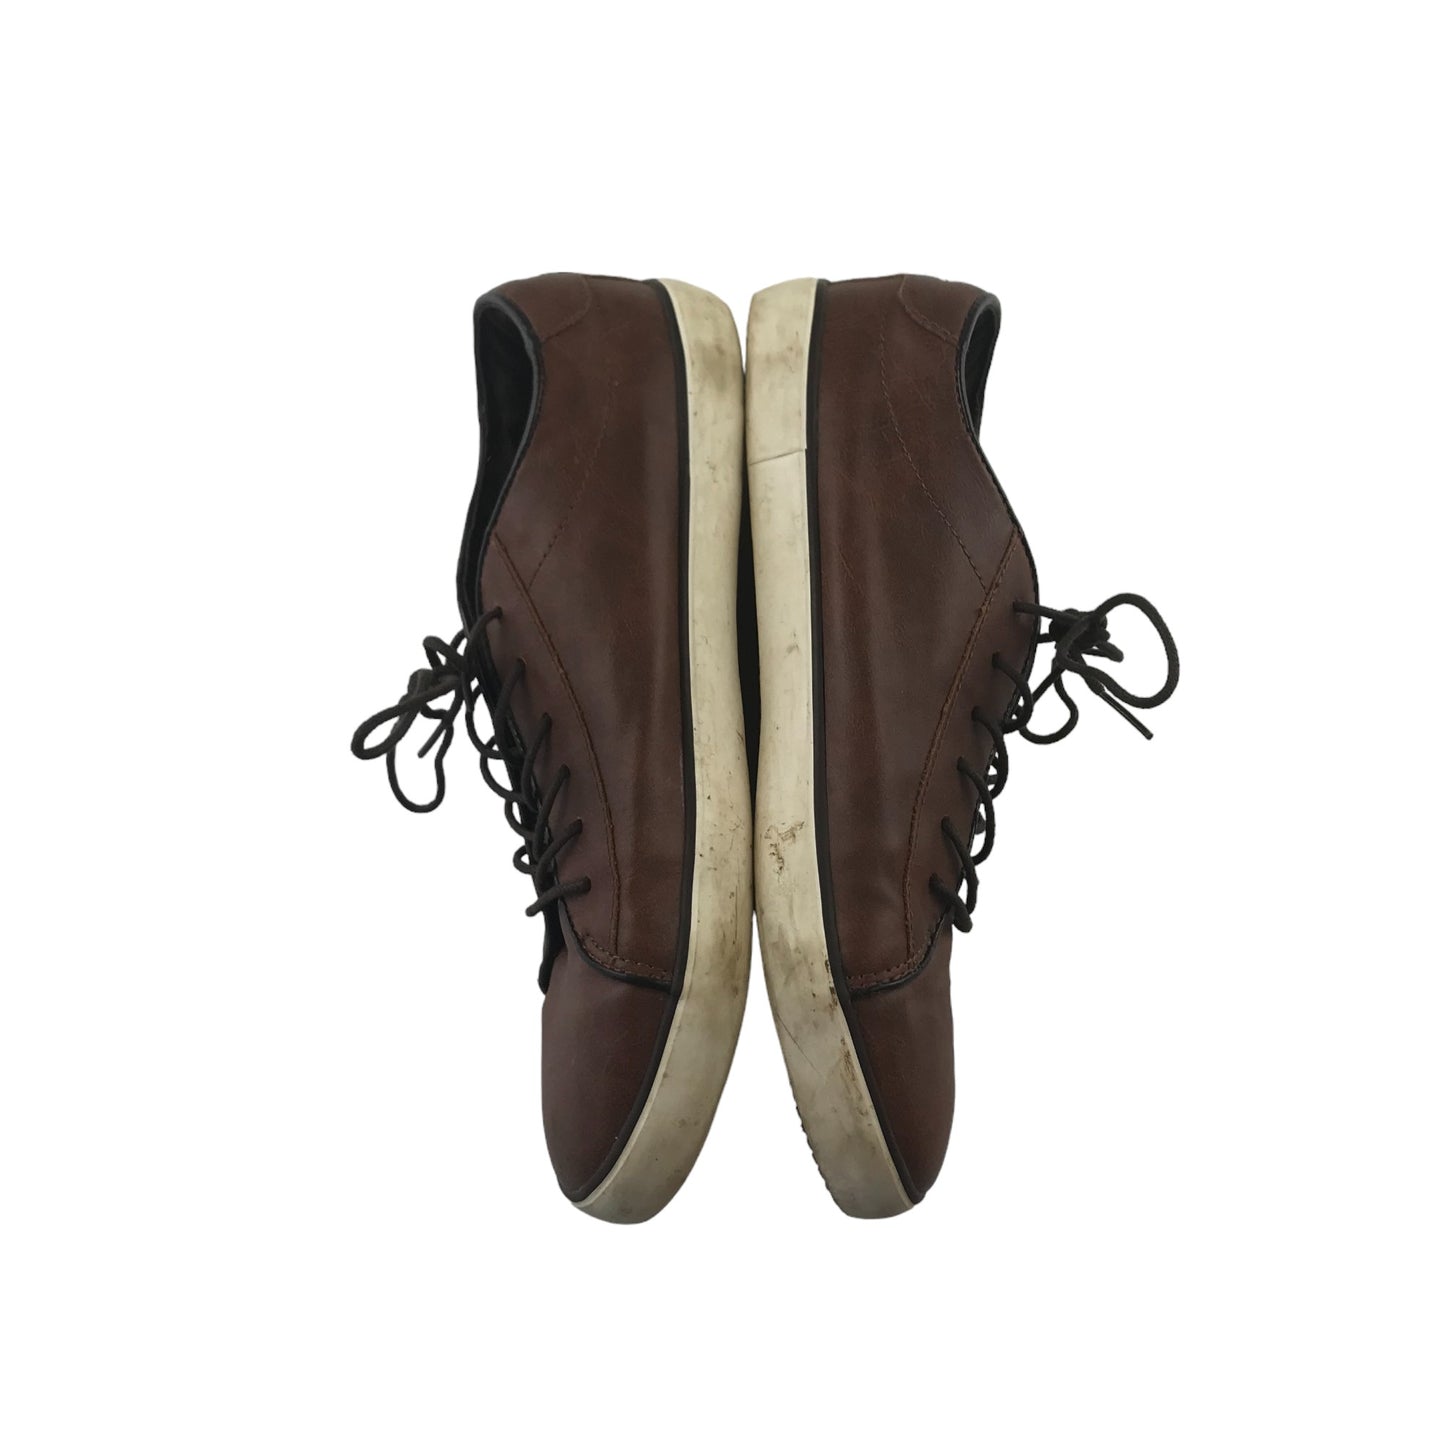 Next Trainer Shoe Size 5 Brown With White Outsole